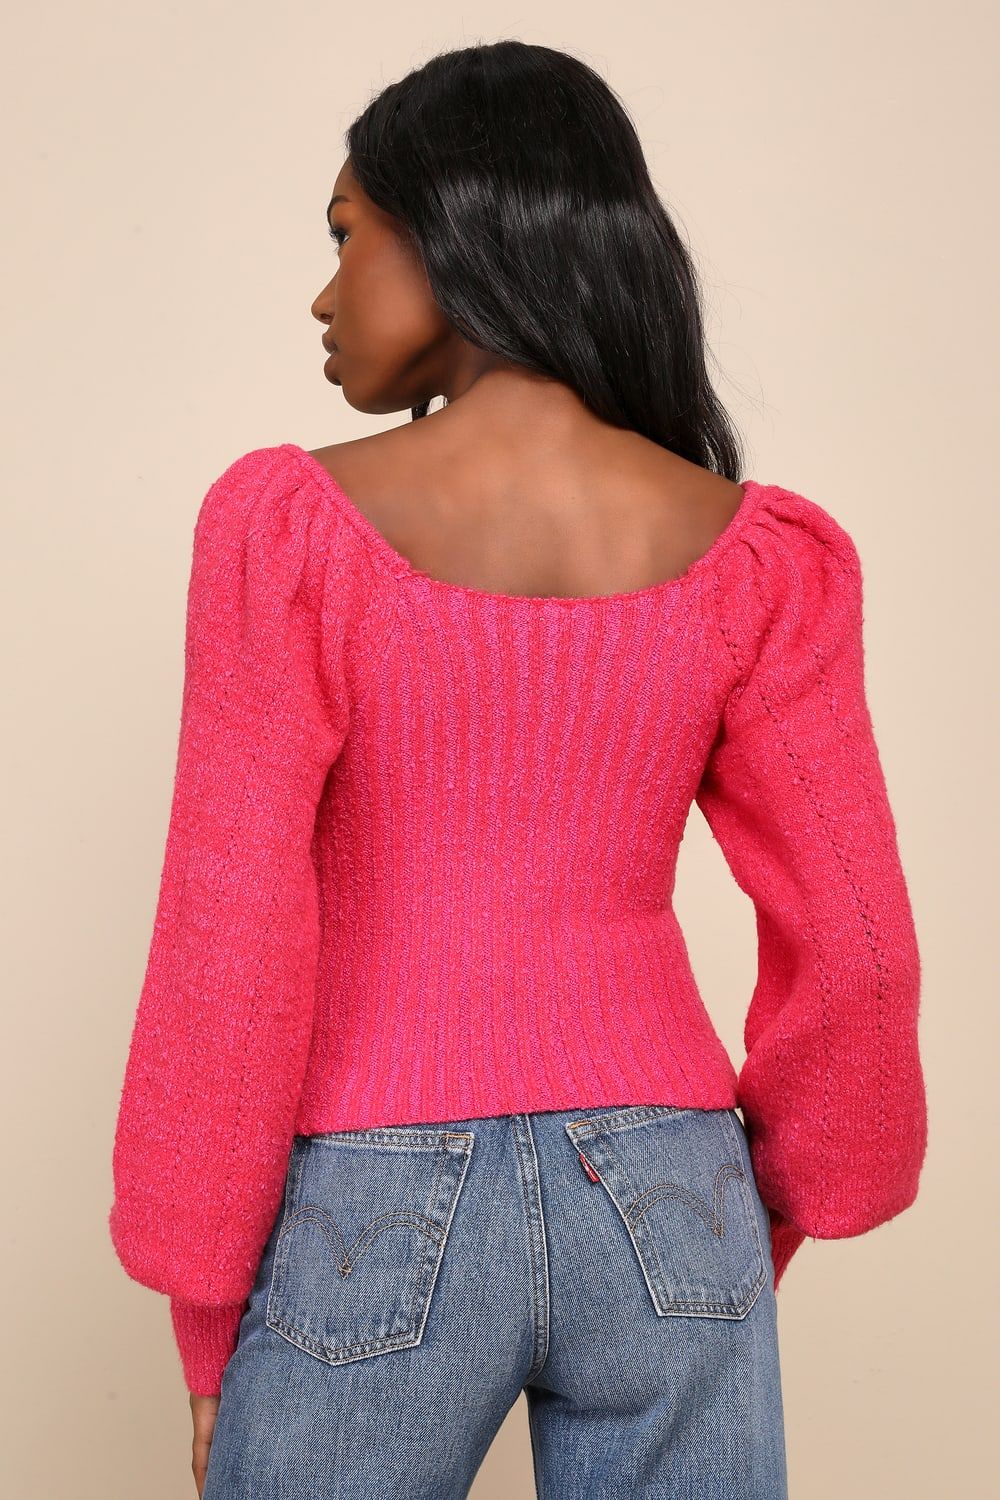 Katie Hot Pink Ribbed Knit Balloon Sleeve Sweater Top | Lulus